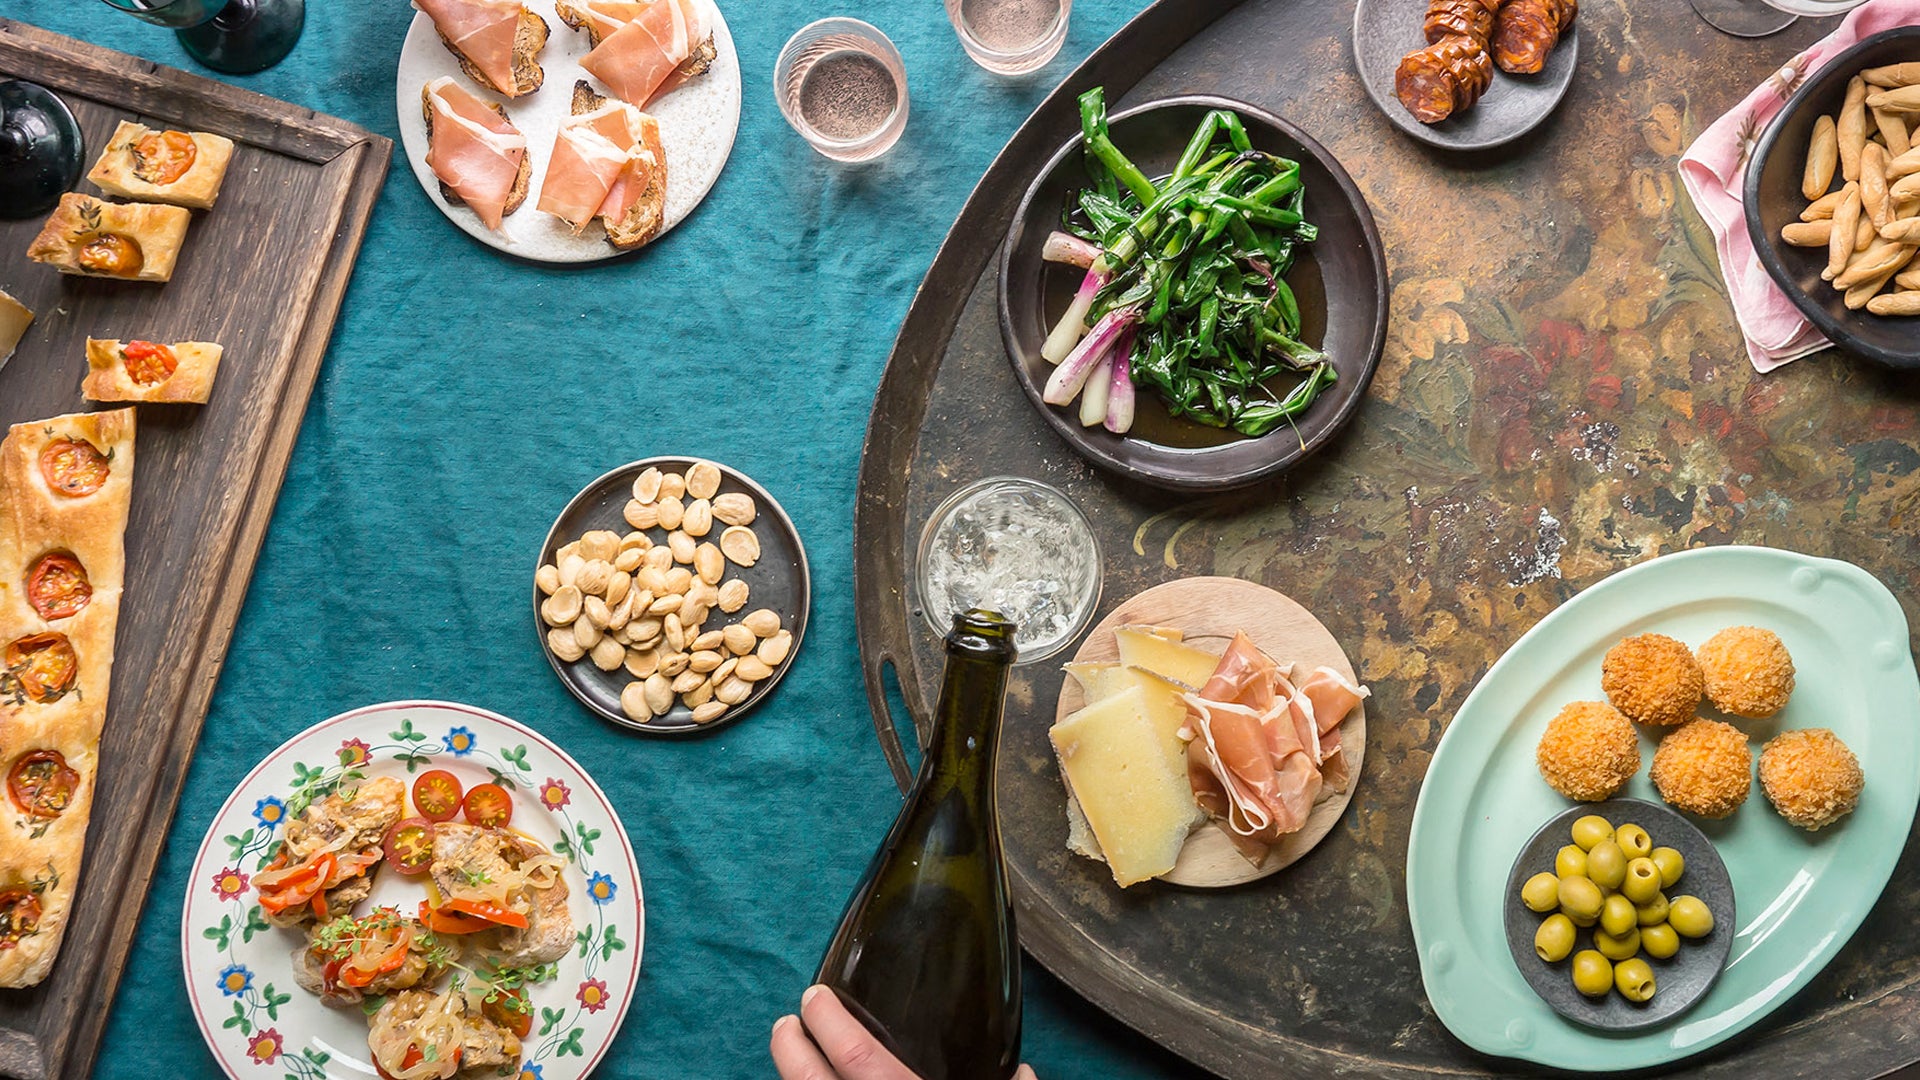 Tips for the Perfect Food and Wine Pairing